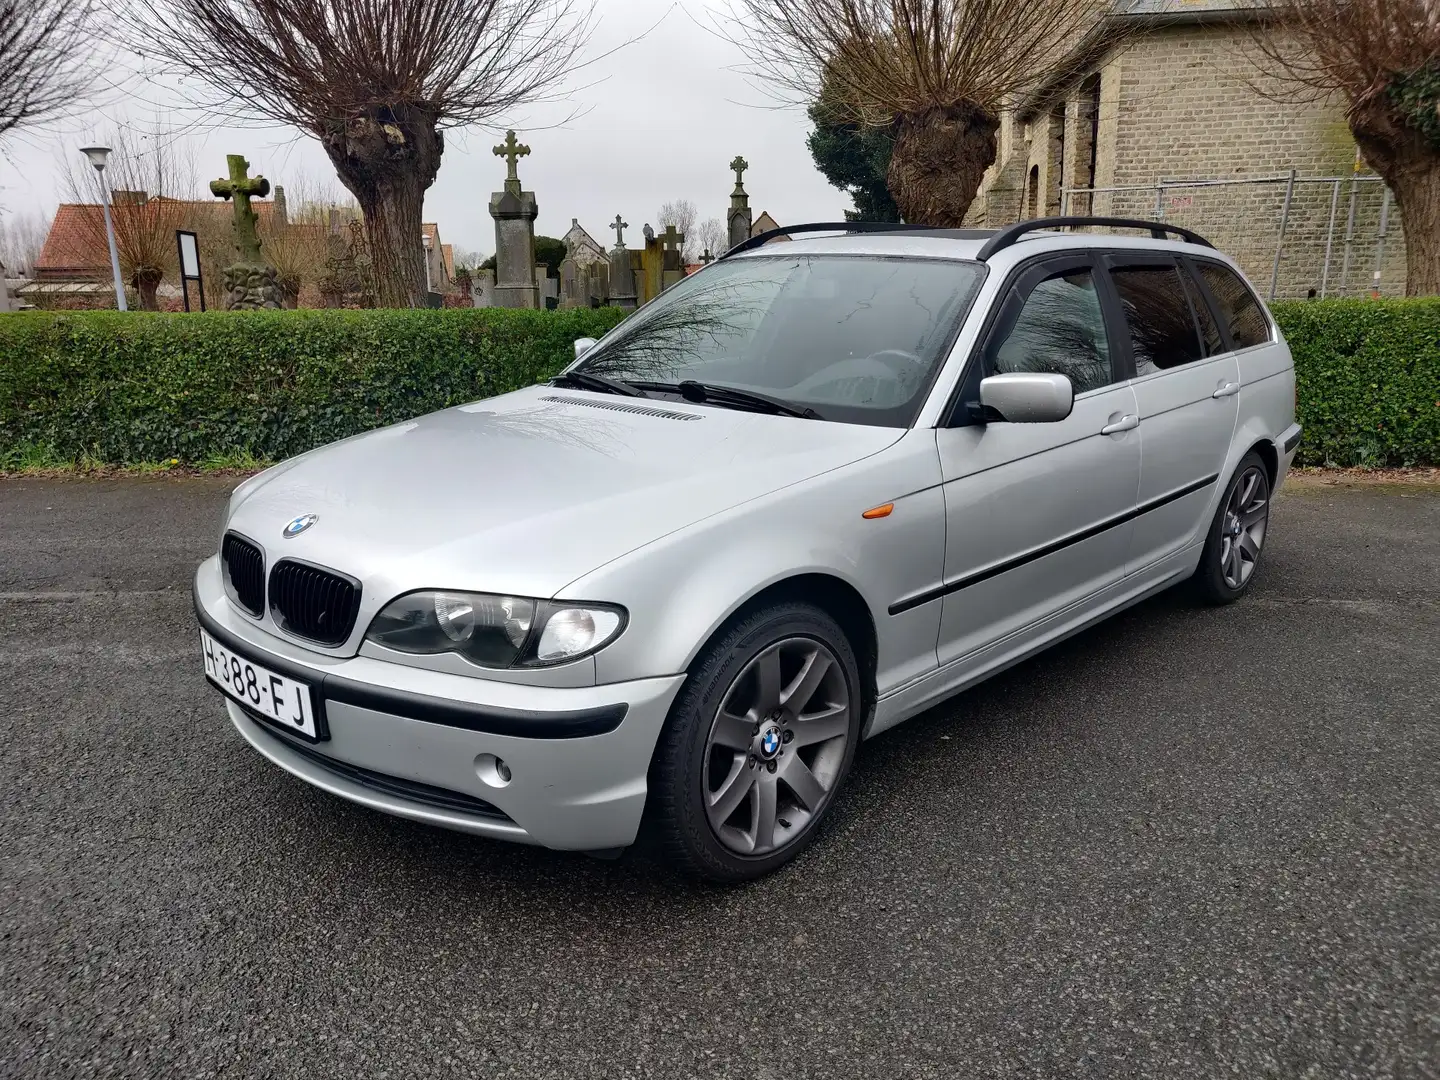 BMW 325 325Xi Touring - automatic - petrol & LPG Zilver - 1